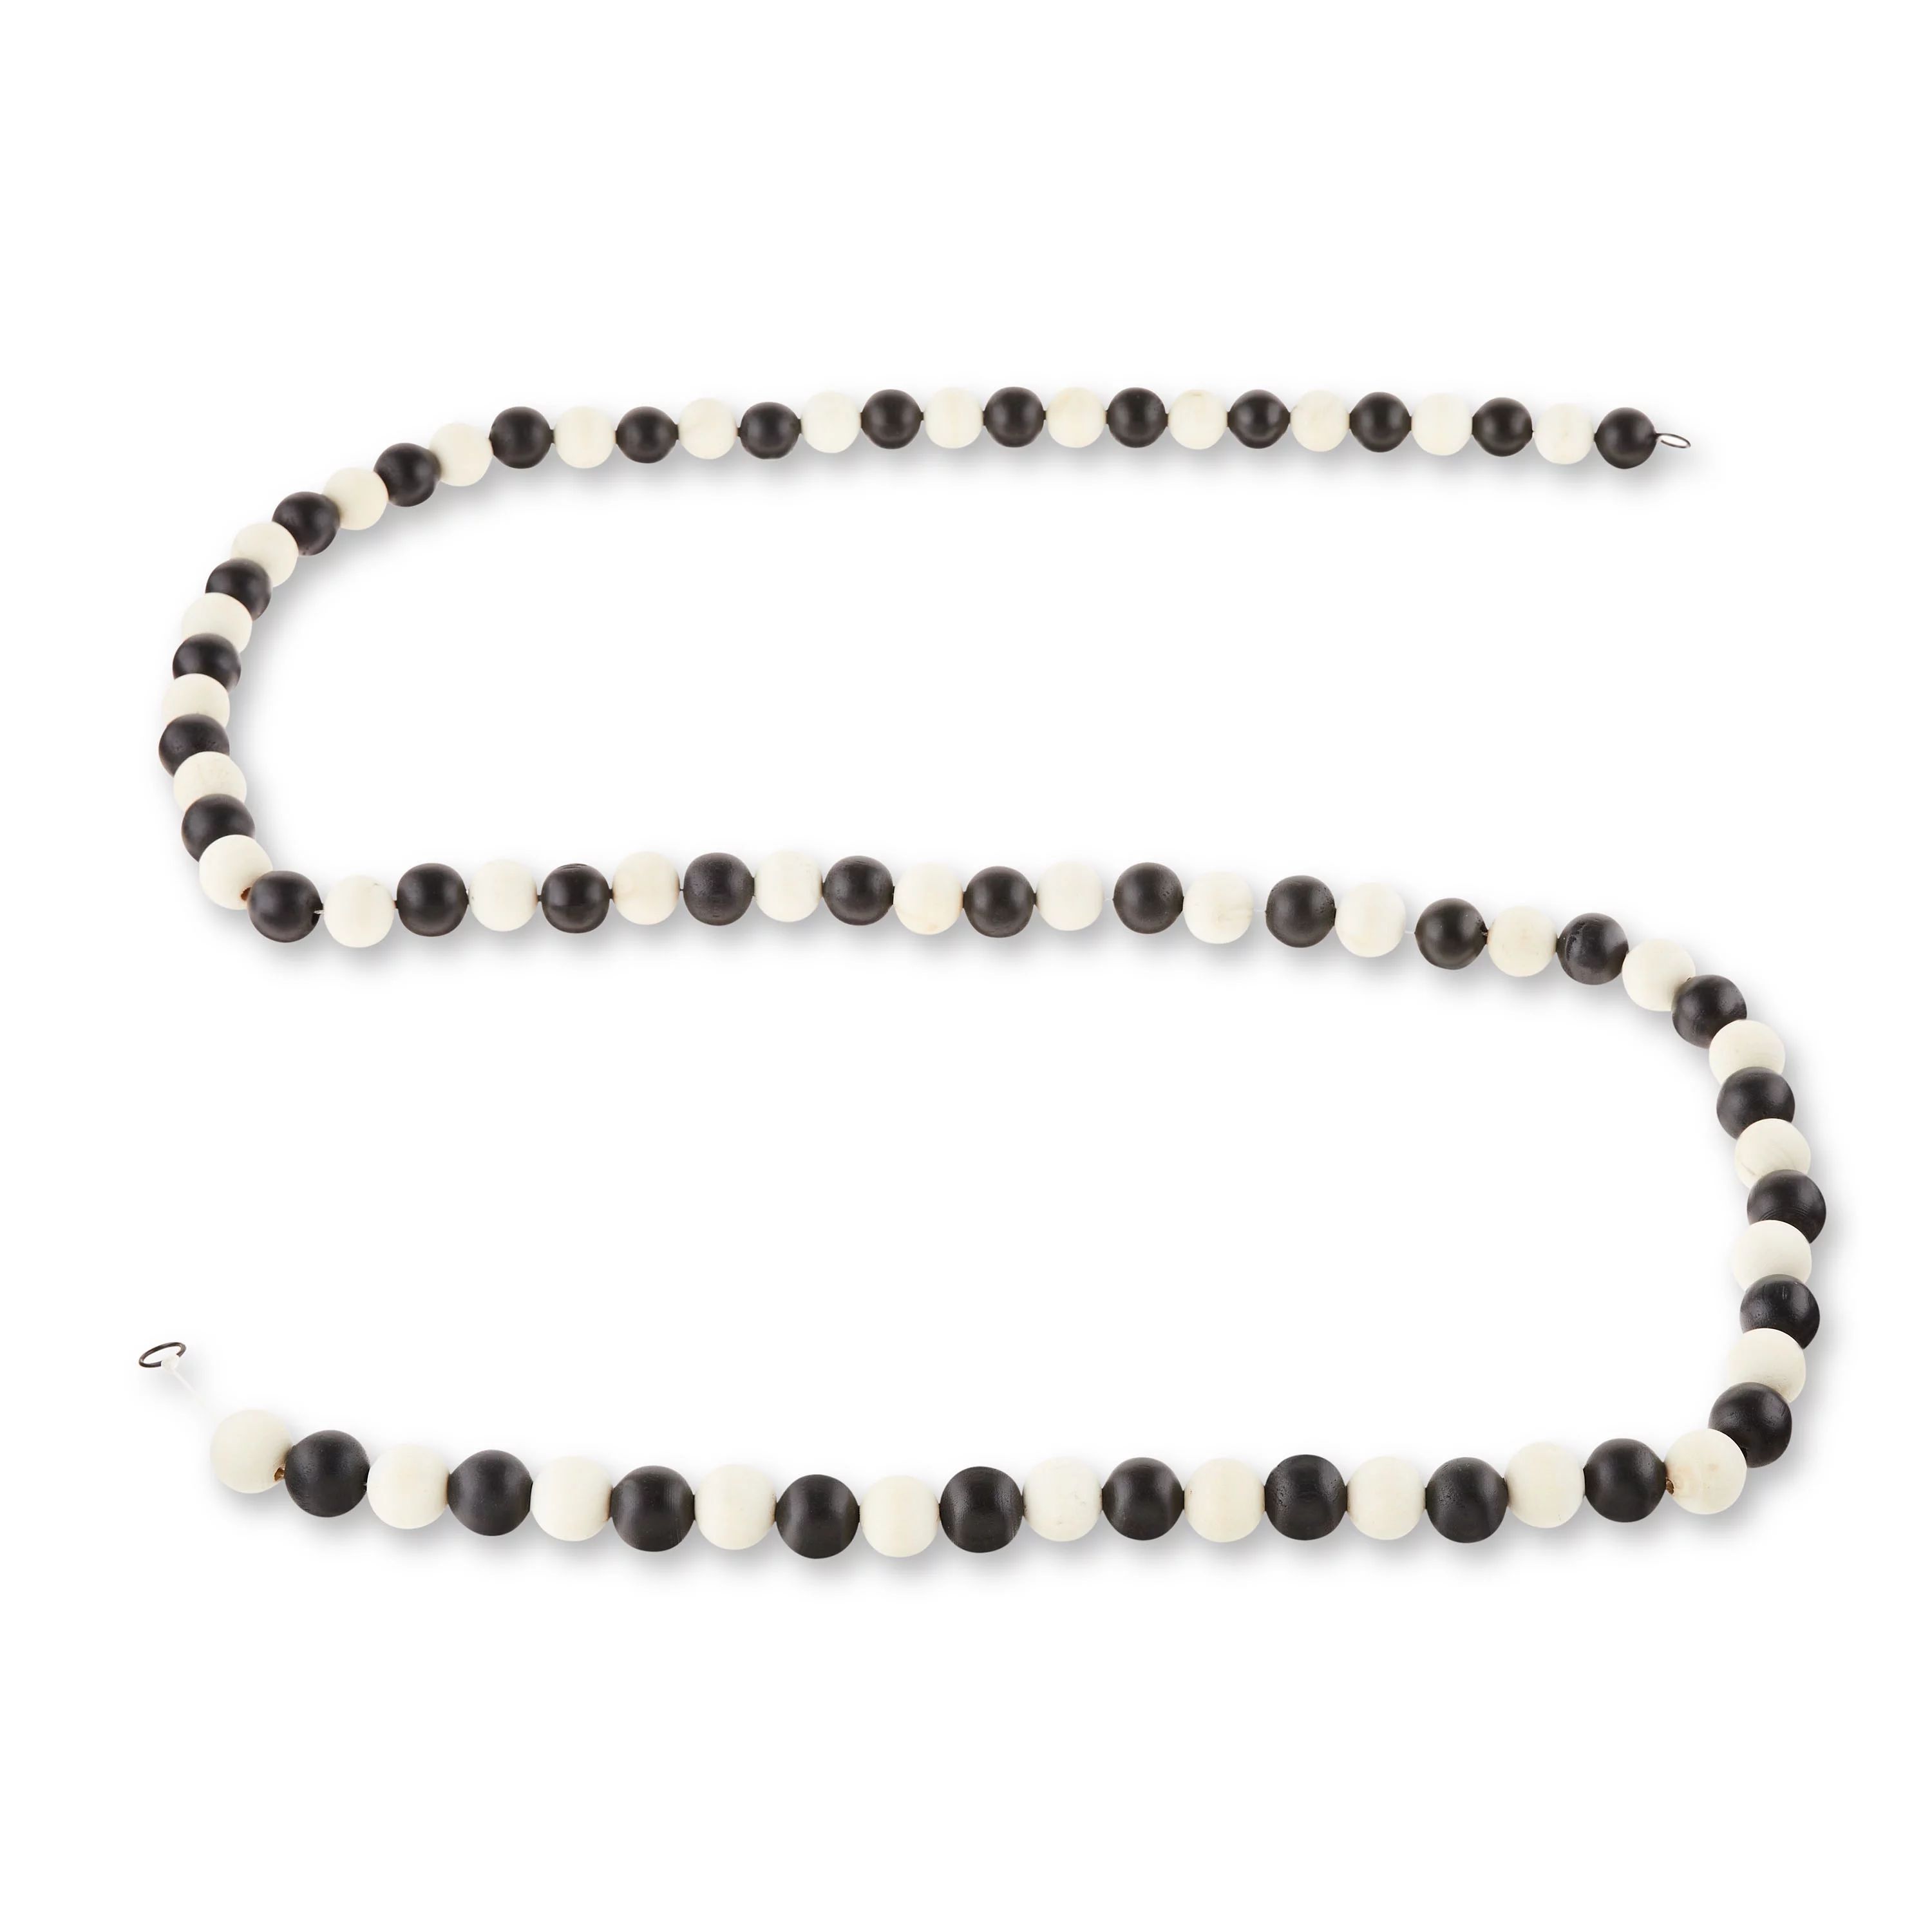 Black and White  Decorative 25mm Wood Bead Garland, 6 ft, by Holiday Time | Walmart (US)